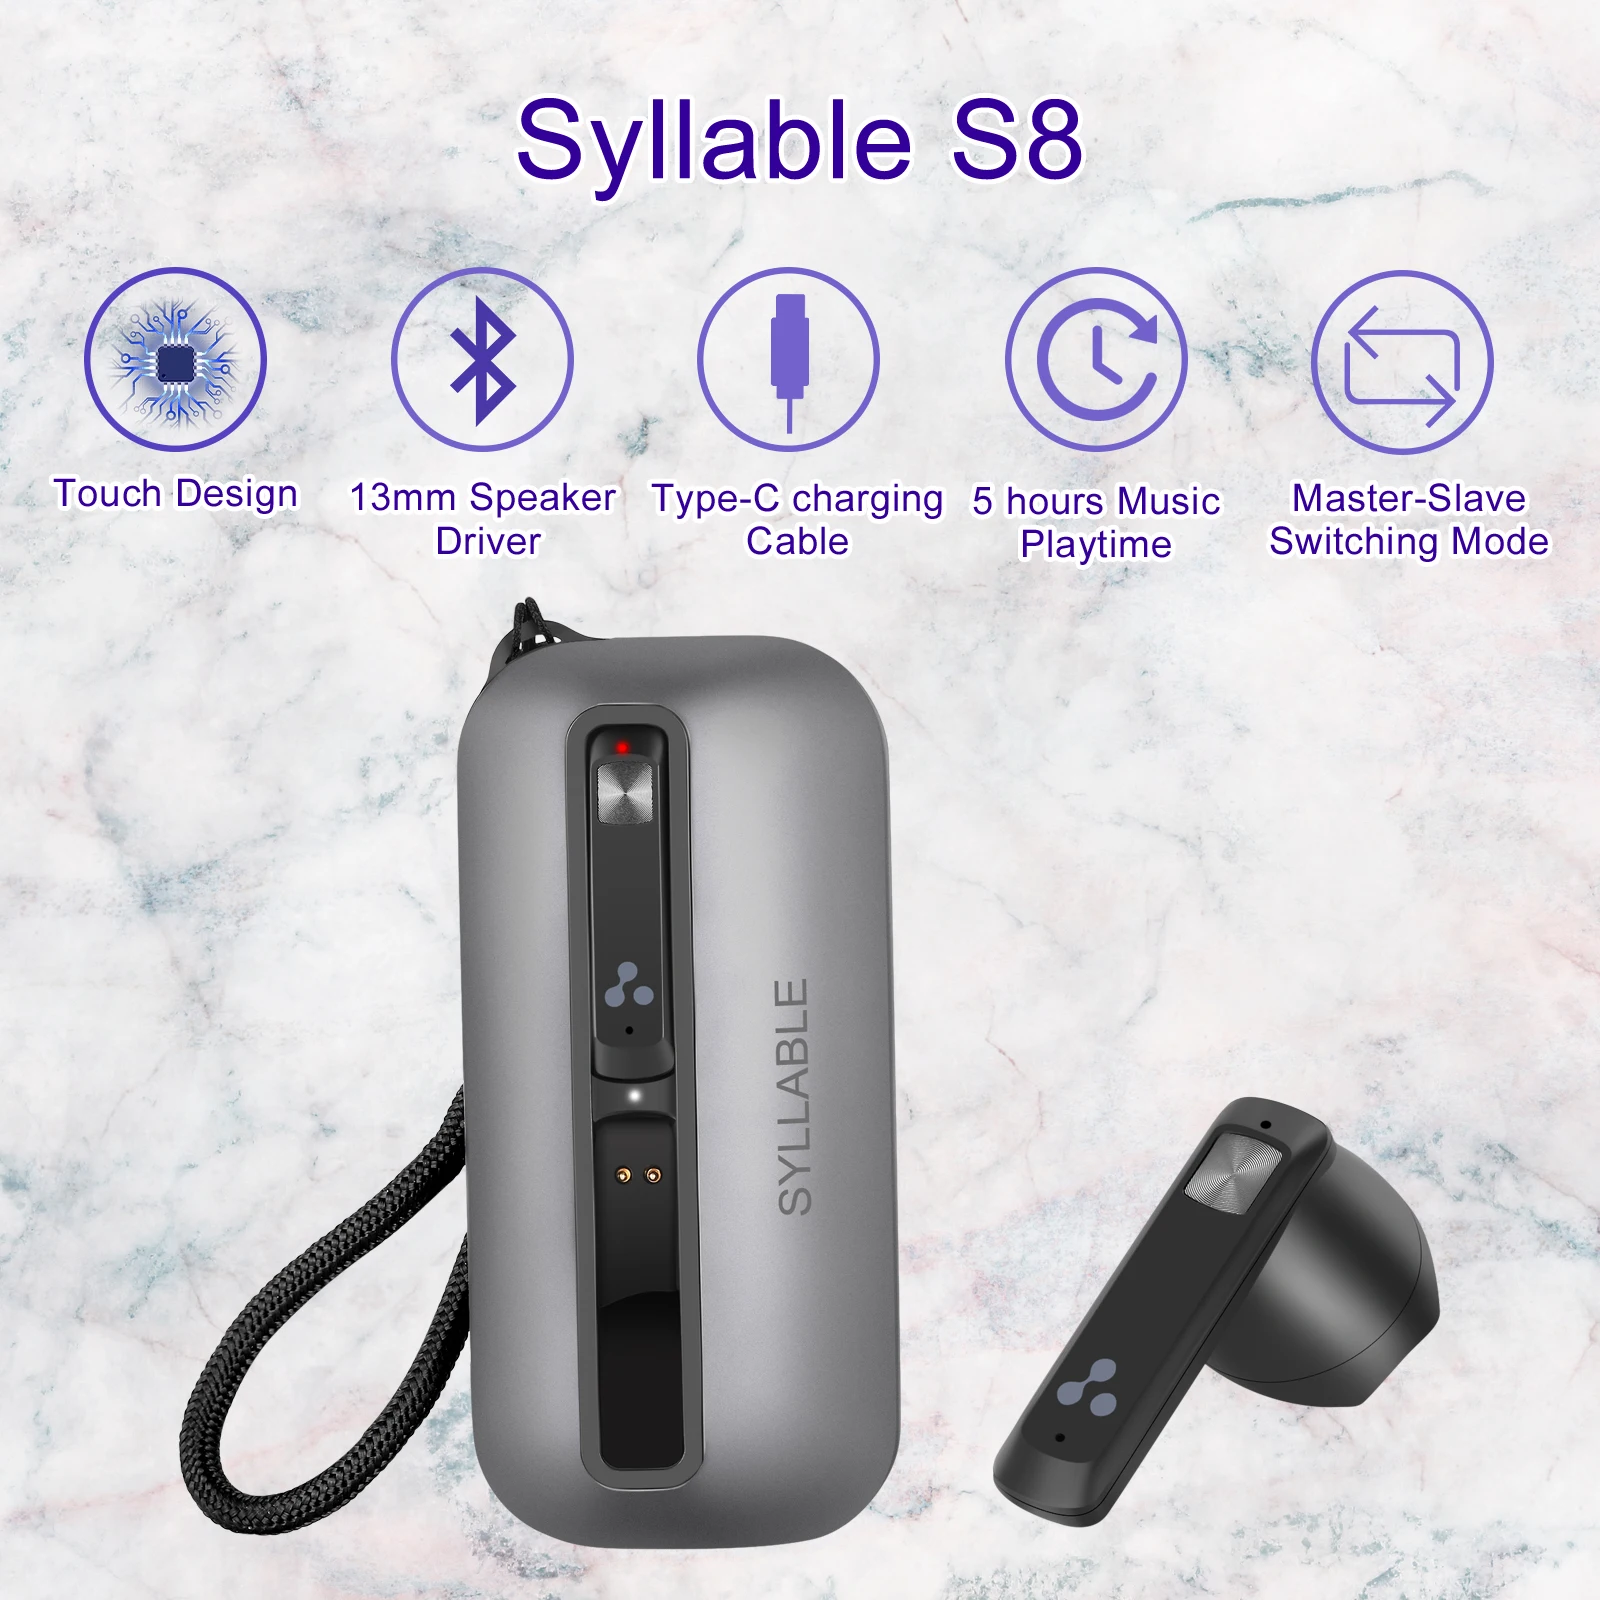 

2023 SYLLABLE S8 TWS Headphone Touch Earphones Master-Slave Switching Mode 5 hours Wireless S8 Headset 13mm Speaker Driver